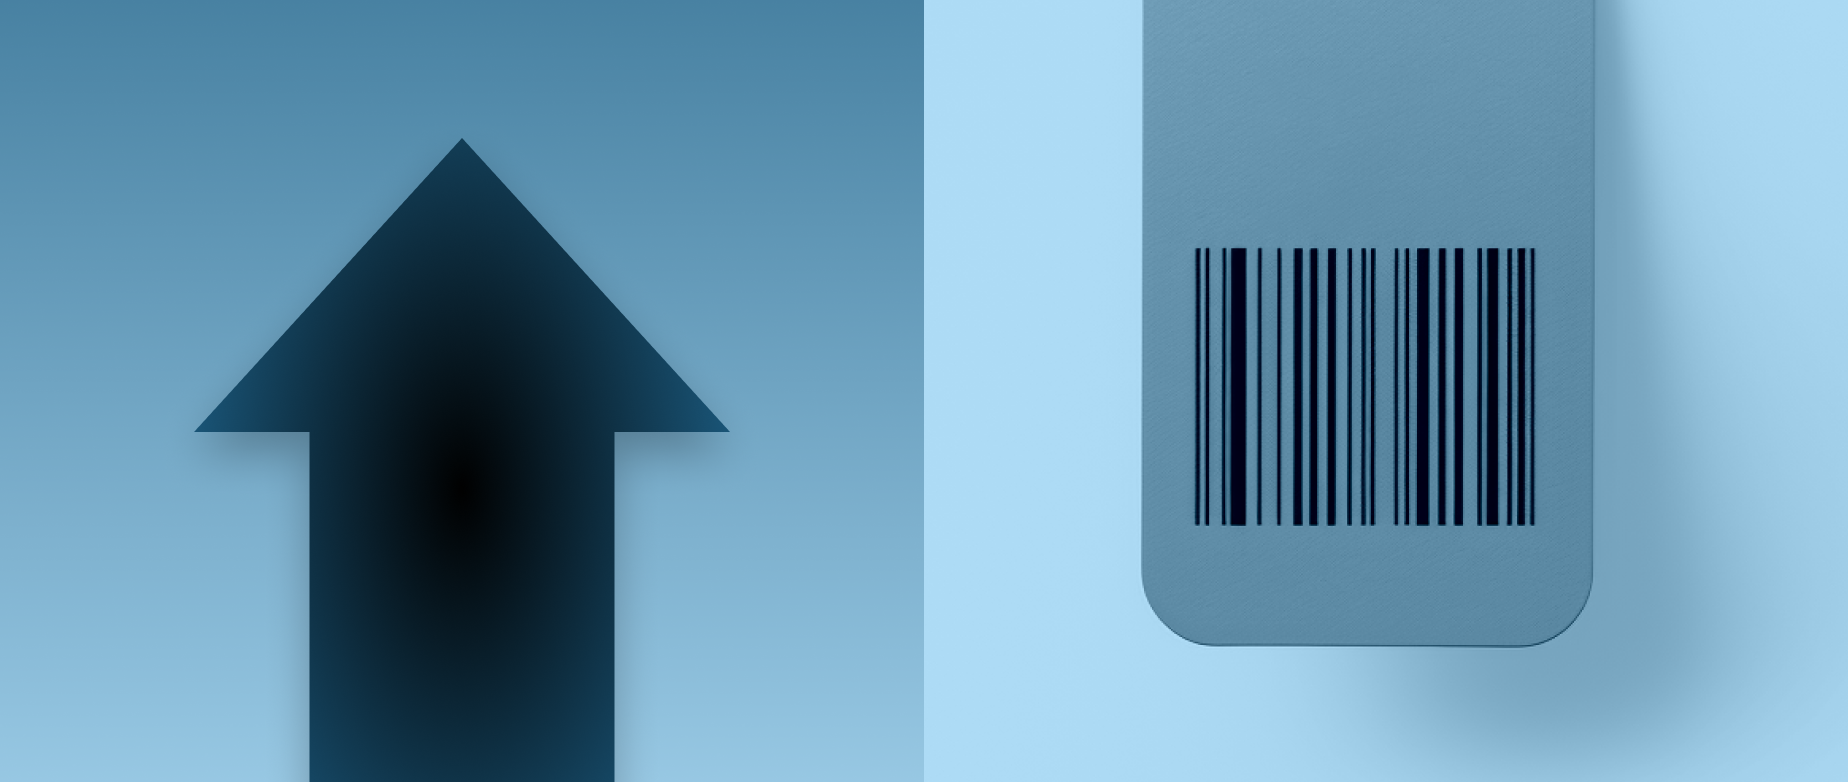 image of barcode and up arrow representing profit margin